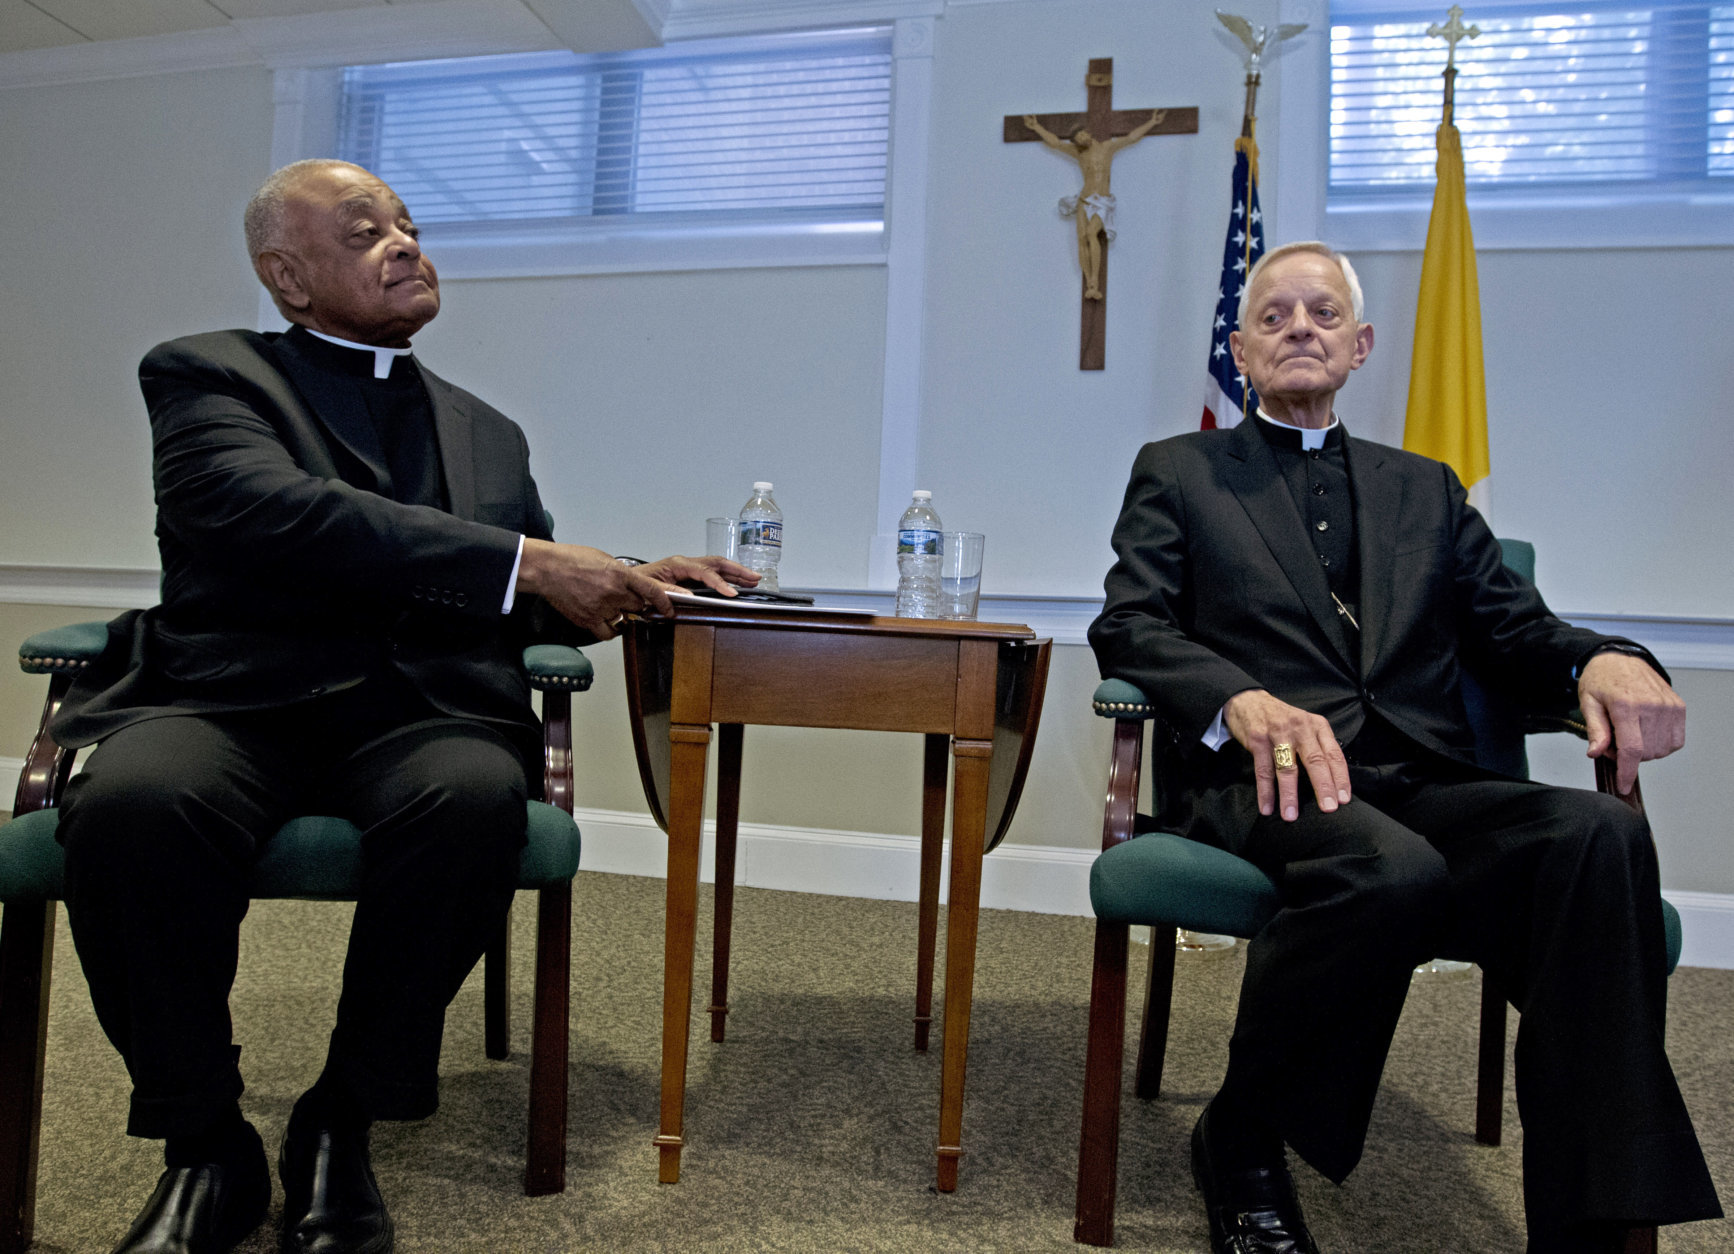 Archbishop designated by Pope Francis to the Archdiocese of Washington, Archbishop Wilton D. Gregory, left, and Cardinal Donald Wuerl, during the news conference at Washington Archdiocesan Pastoral Center in Hyattsville, Md., Thursday, April 4, 2019. Archbishop-designate Gregory will succeed Cardinal Donald Wuerl. (AP Photo/Jose Luis Magana)